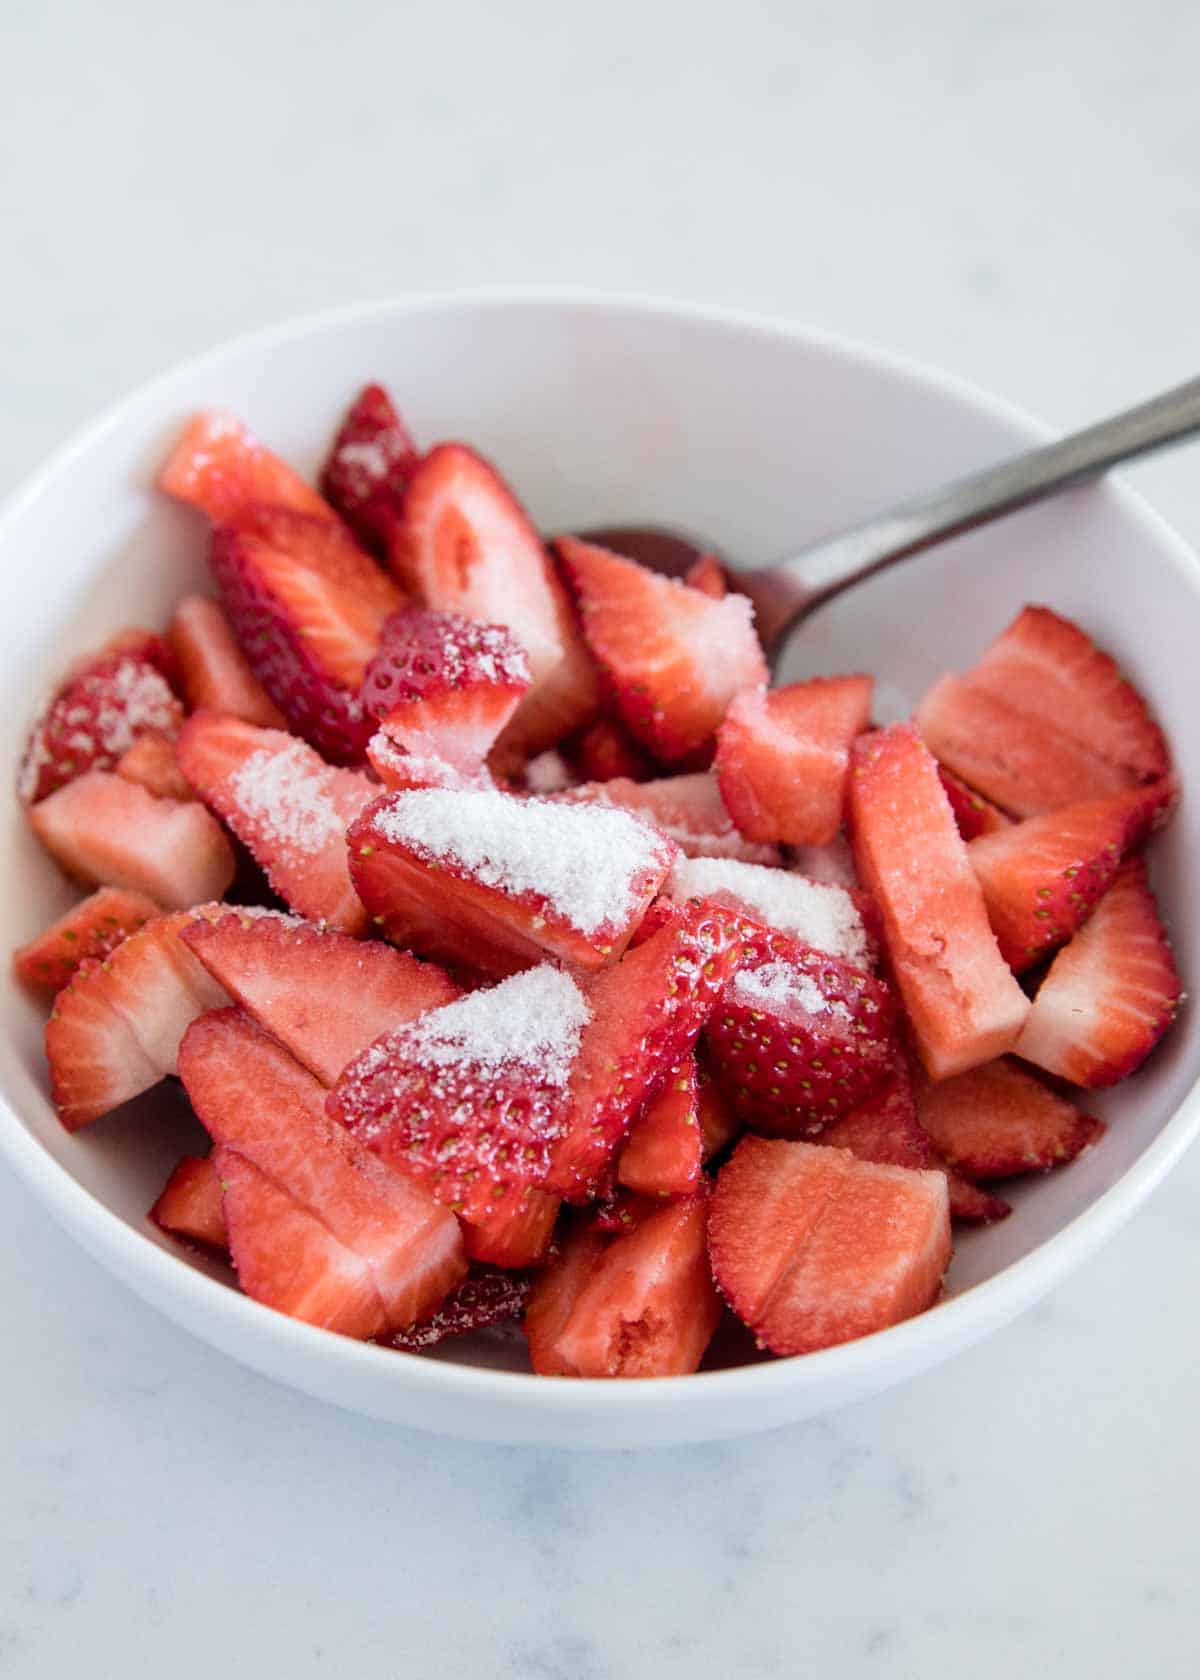 Diced strawberries in bowl with sugar on top.